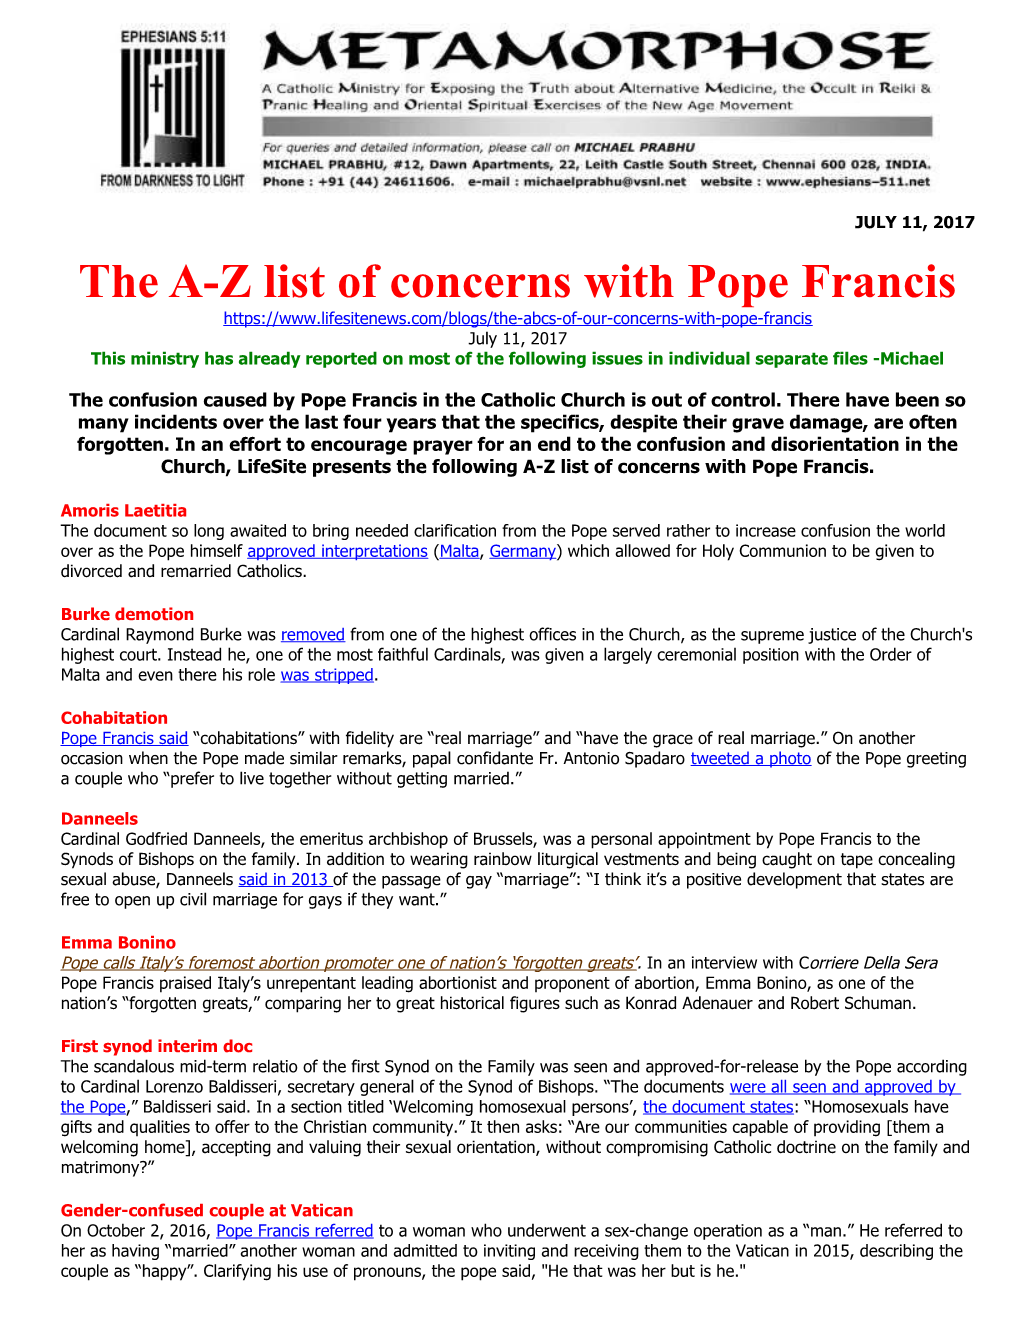 The A-Z List of Concerns with Pope Francis